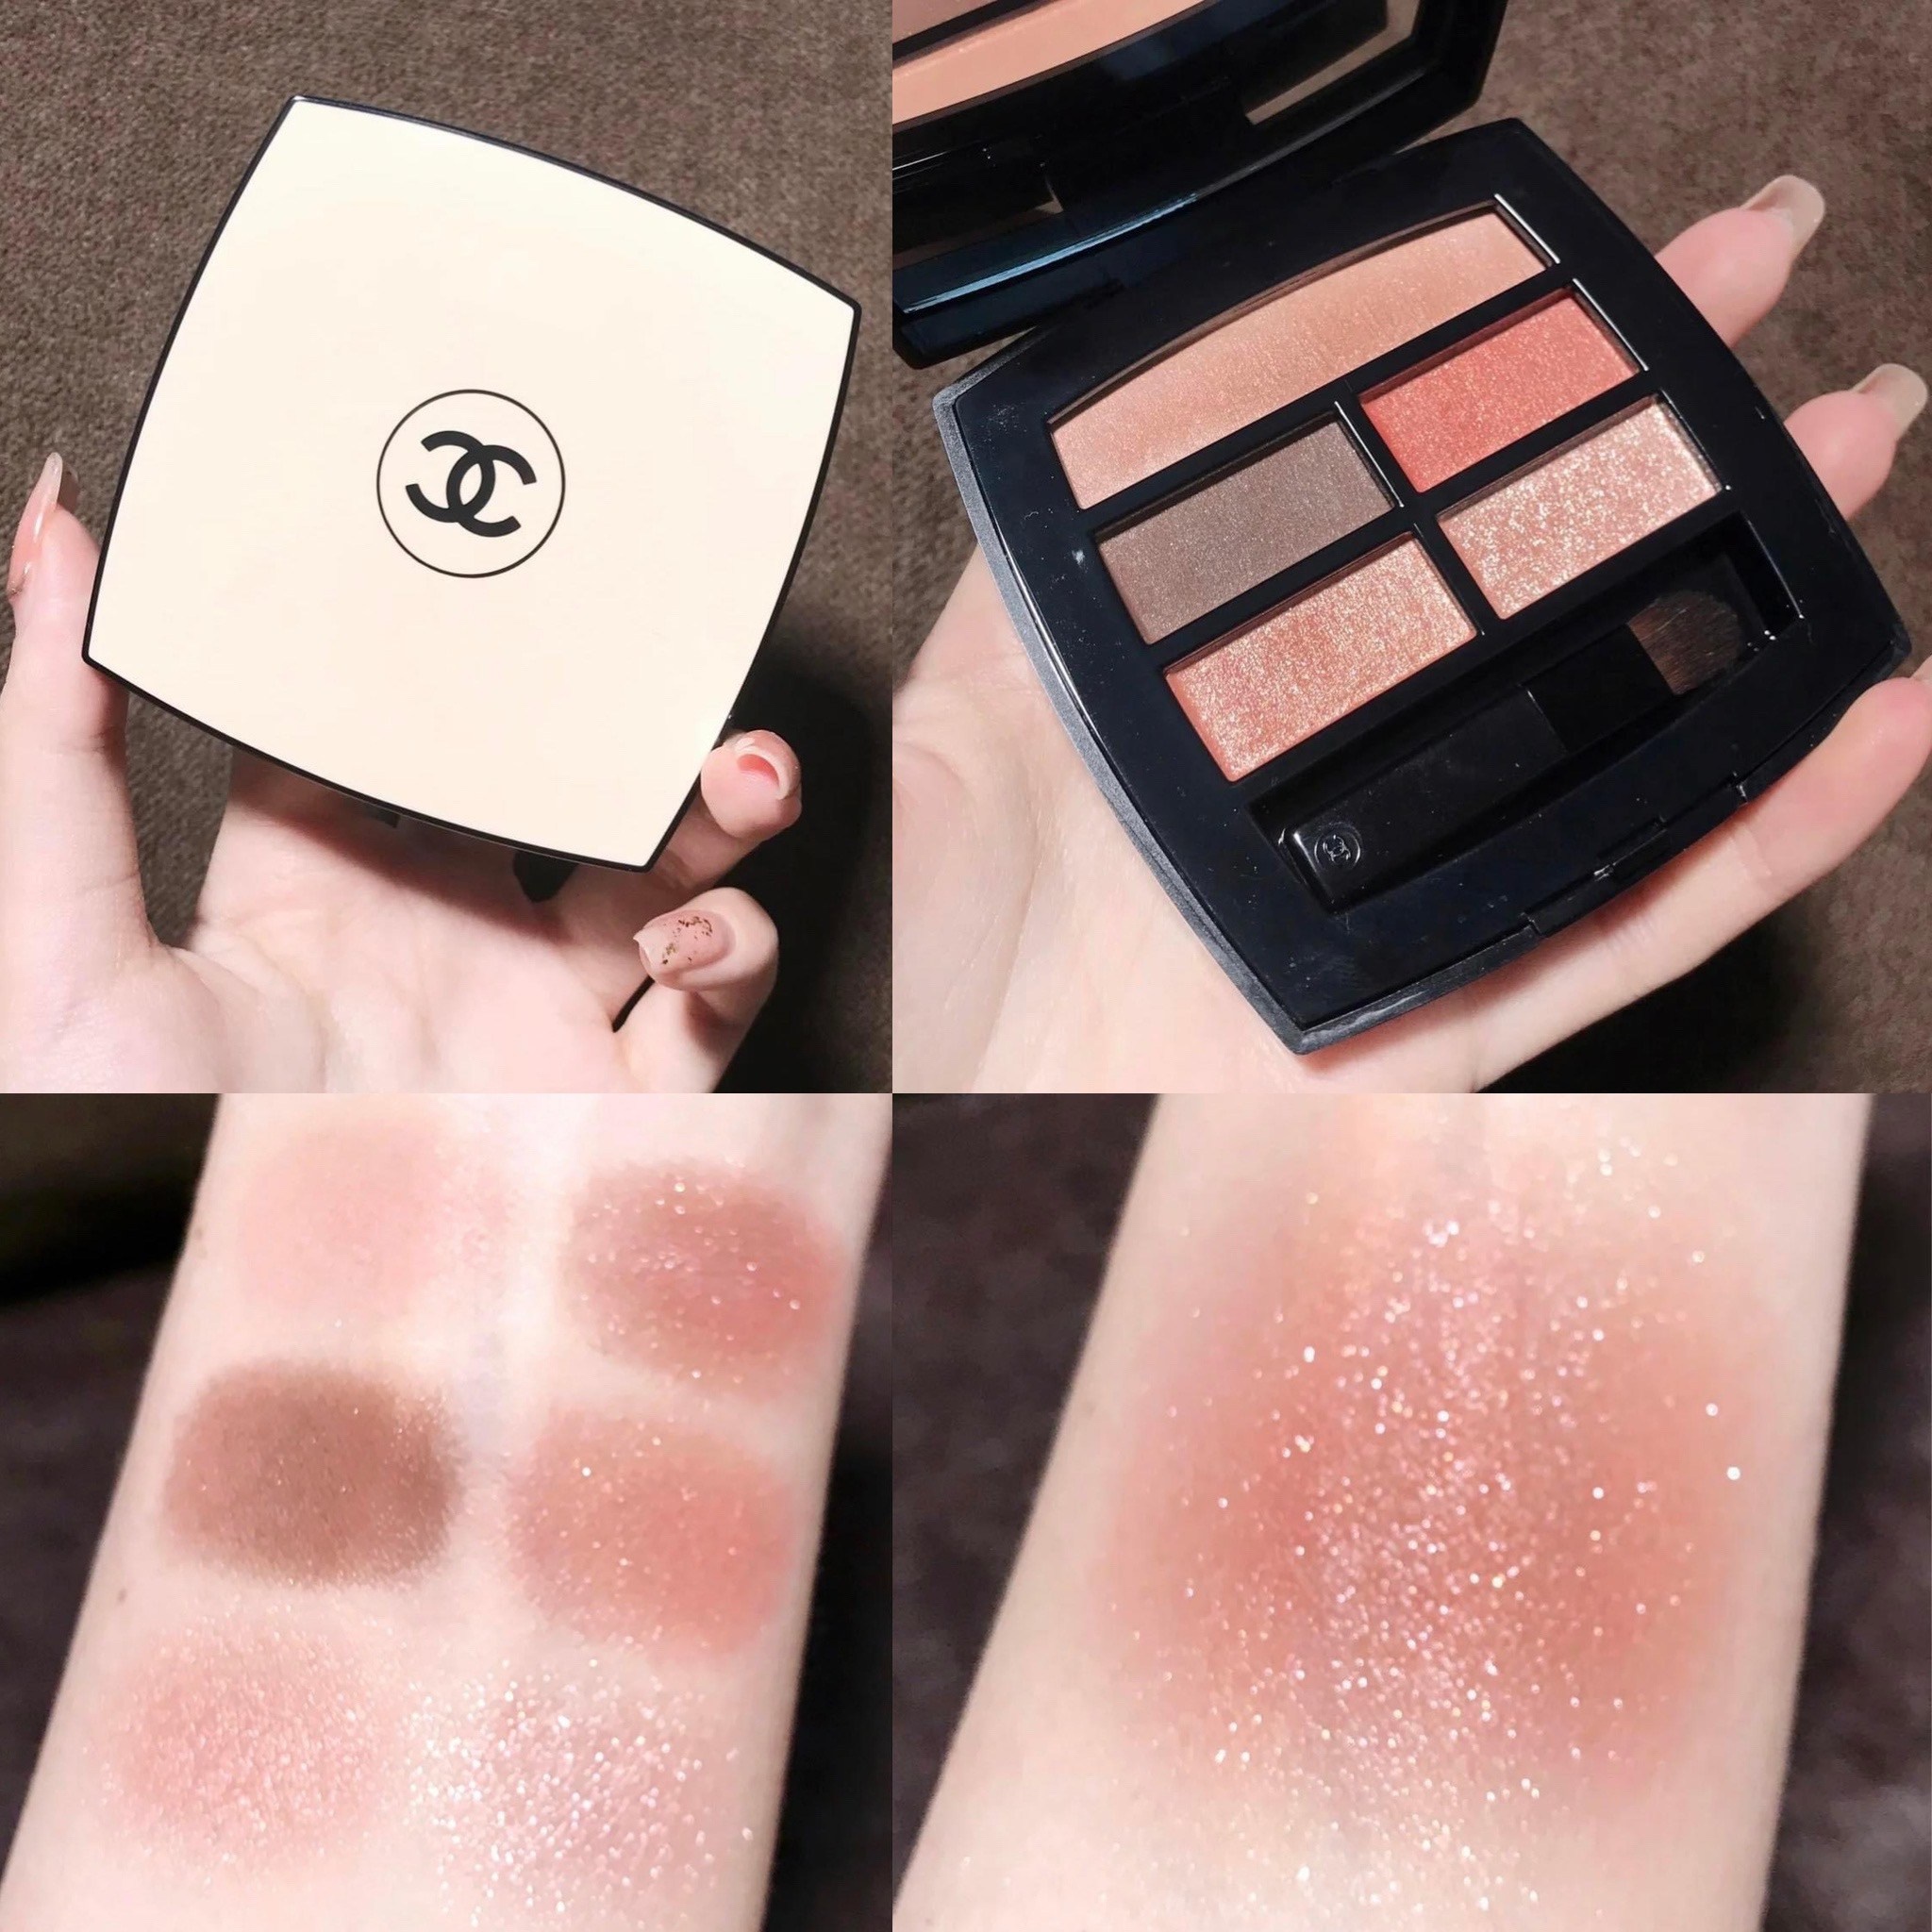 chanel les beiges healthy glow natural eyeshadow palette warm